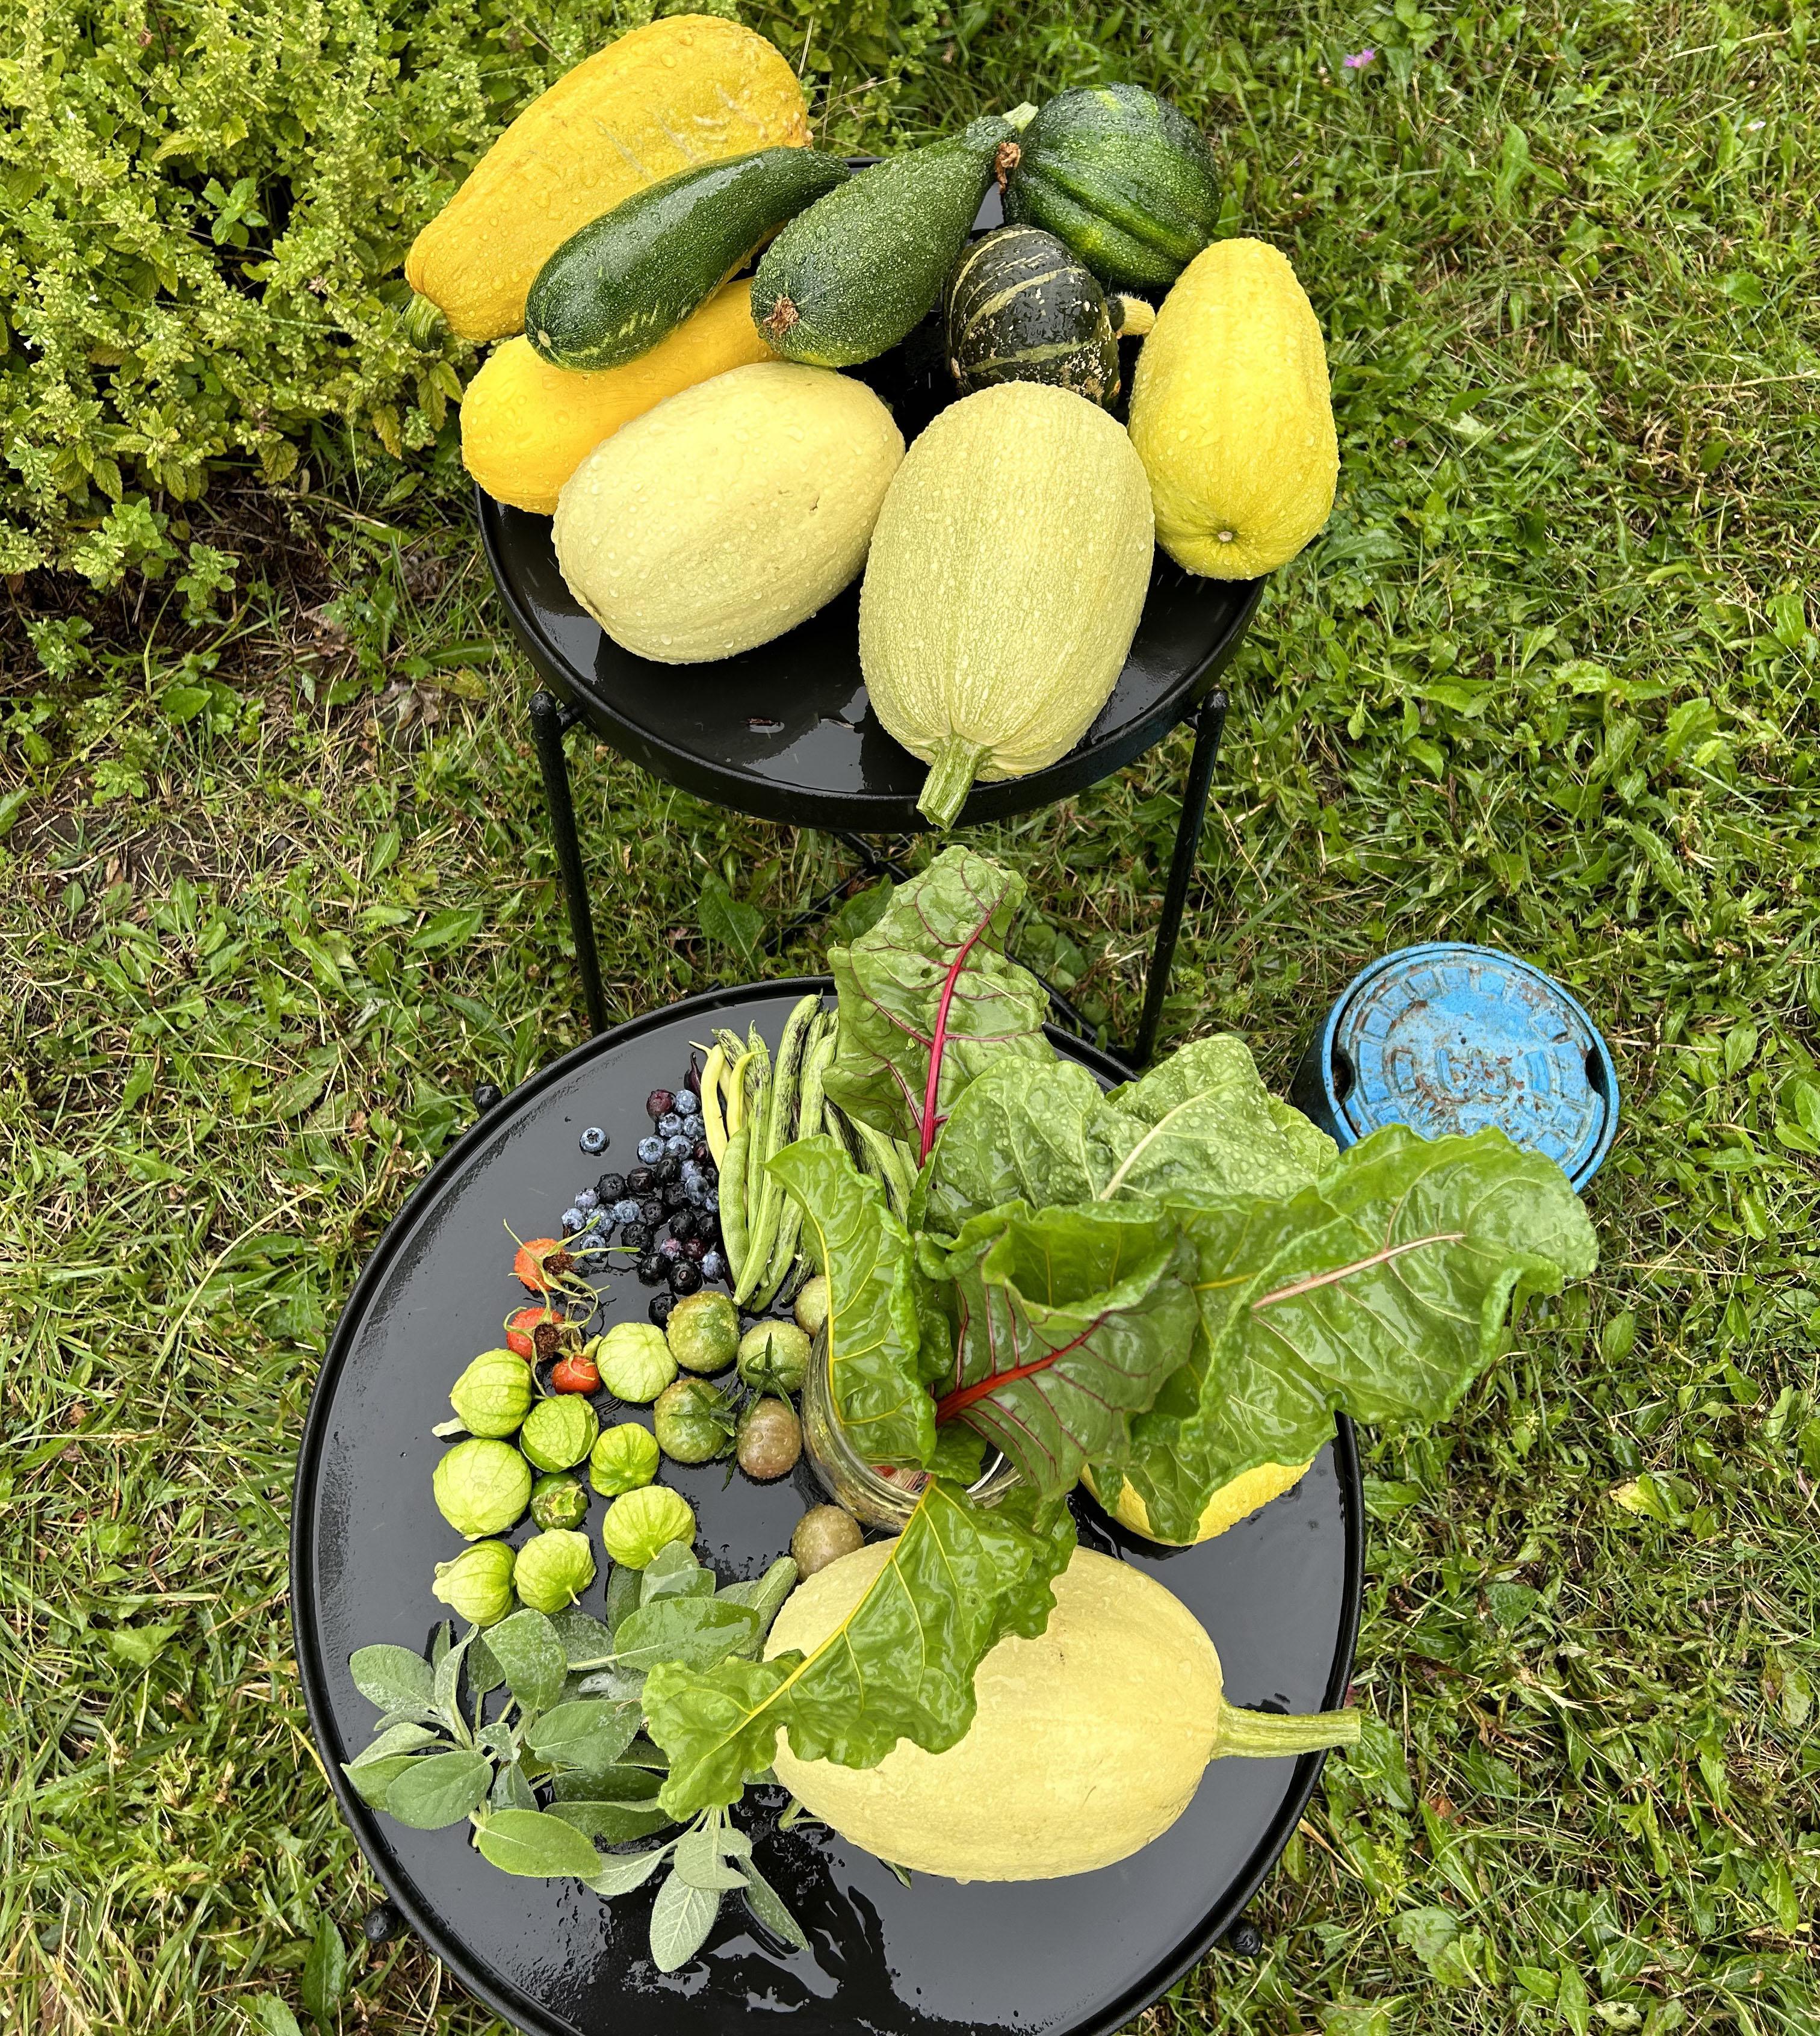 Produce gathered from the Permaculture Living Laboratory